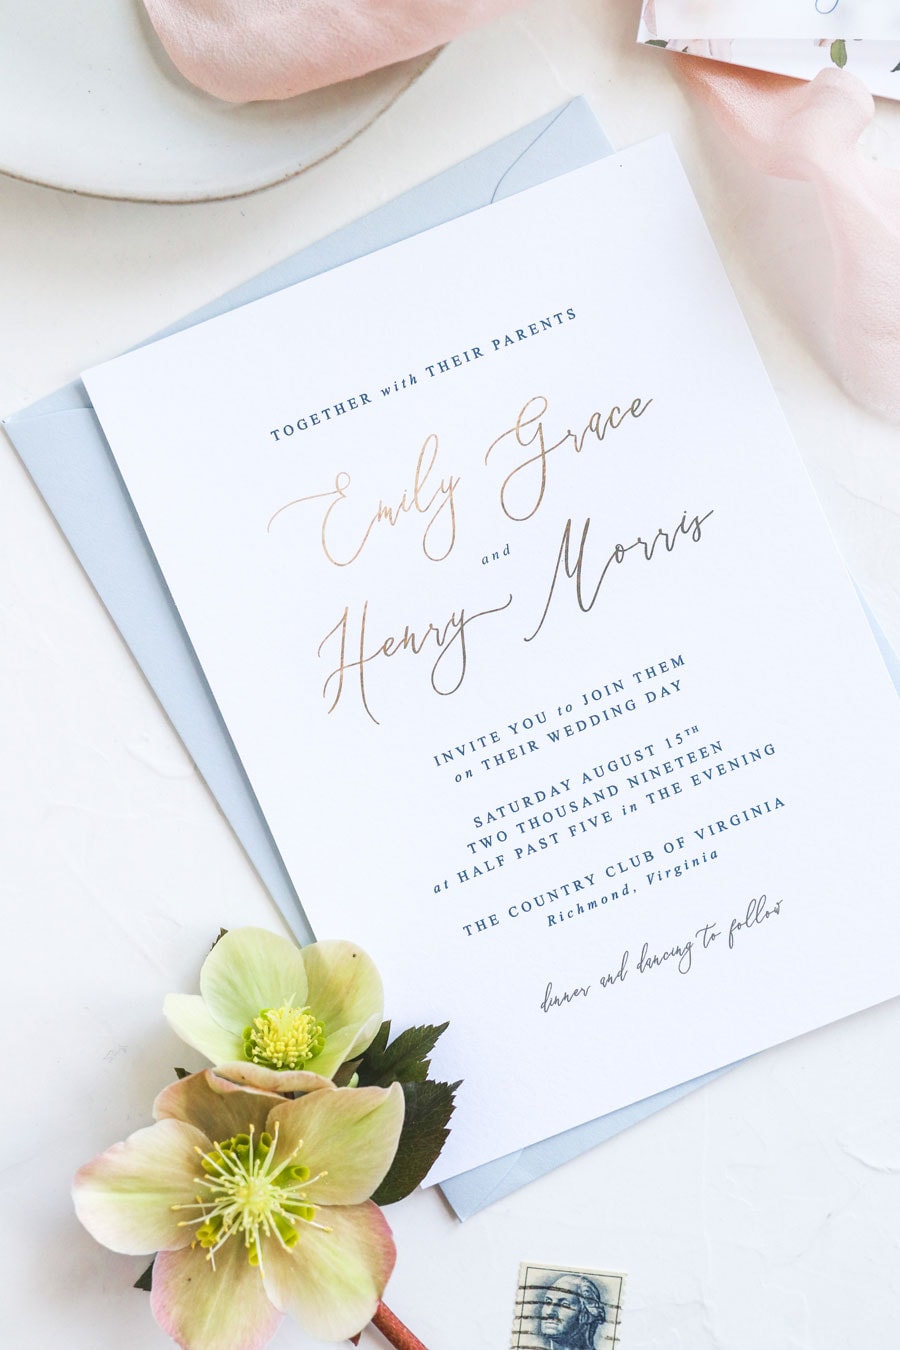 My wedding invitation business started with a question: how to make passive income (ideally with no job and no money to invest upfront). Last year alone I made $18k just from digital downloads. Click through to learn how you can too.